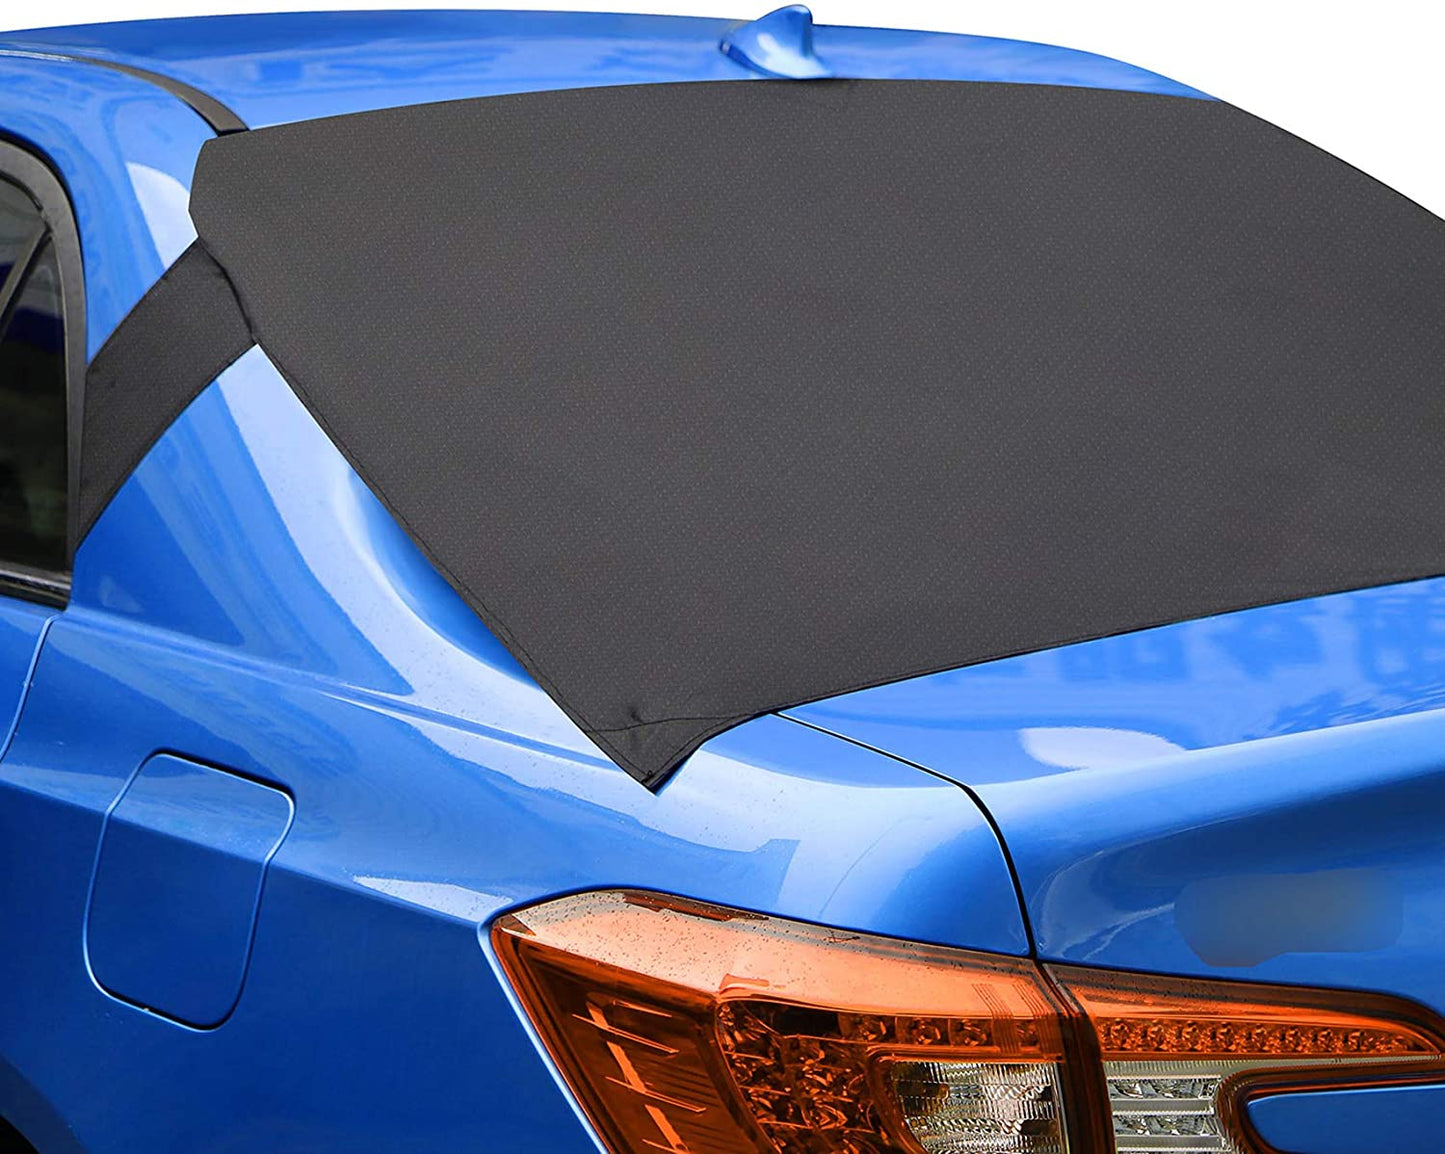 ALTITACO Car Rear Windshield Snow Cover, Rear Windscreen Snow Ice Cover Protector with Flaps and 4 Magnets, Sun Shade Protector Exterior Shield Guard Fits Most Cars, Trucks, SUV and Vans